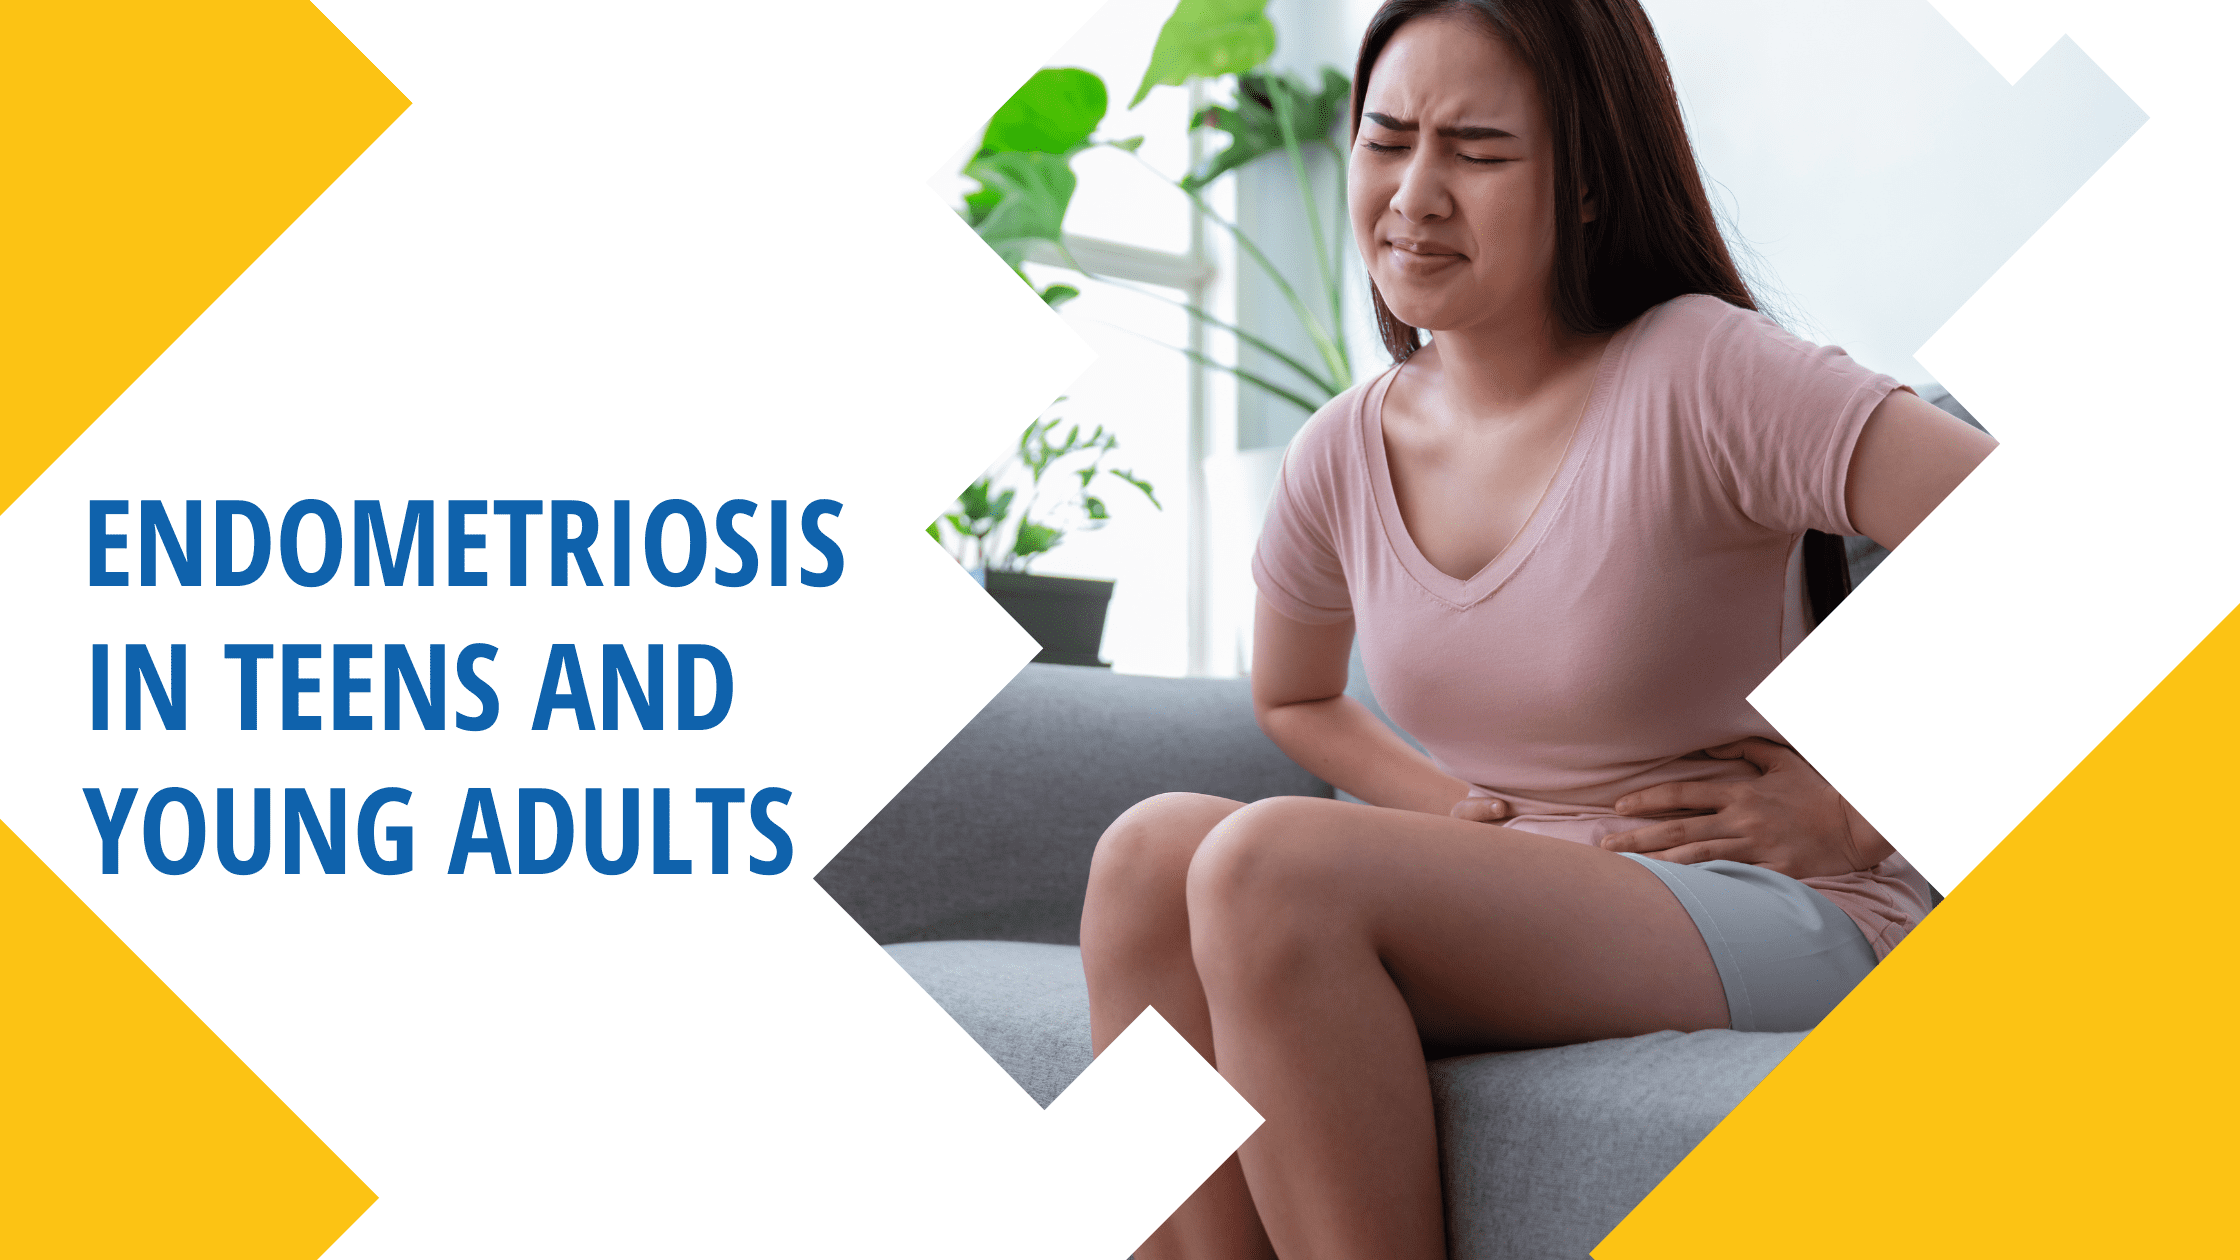 Endometriosis in Teens and Young Adults